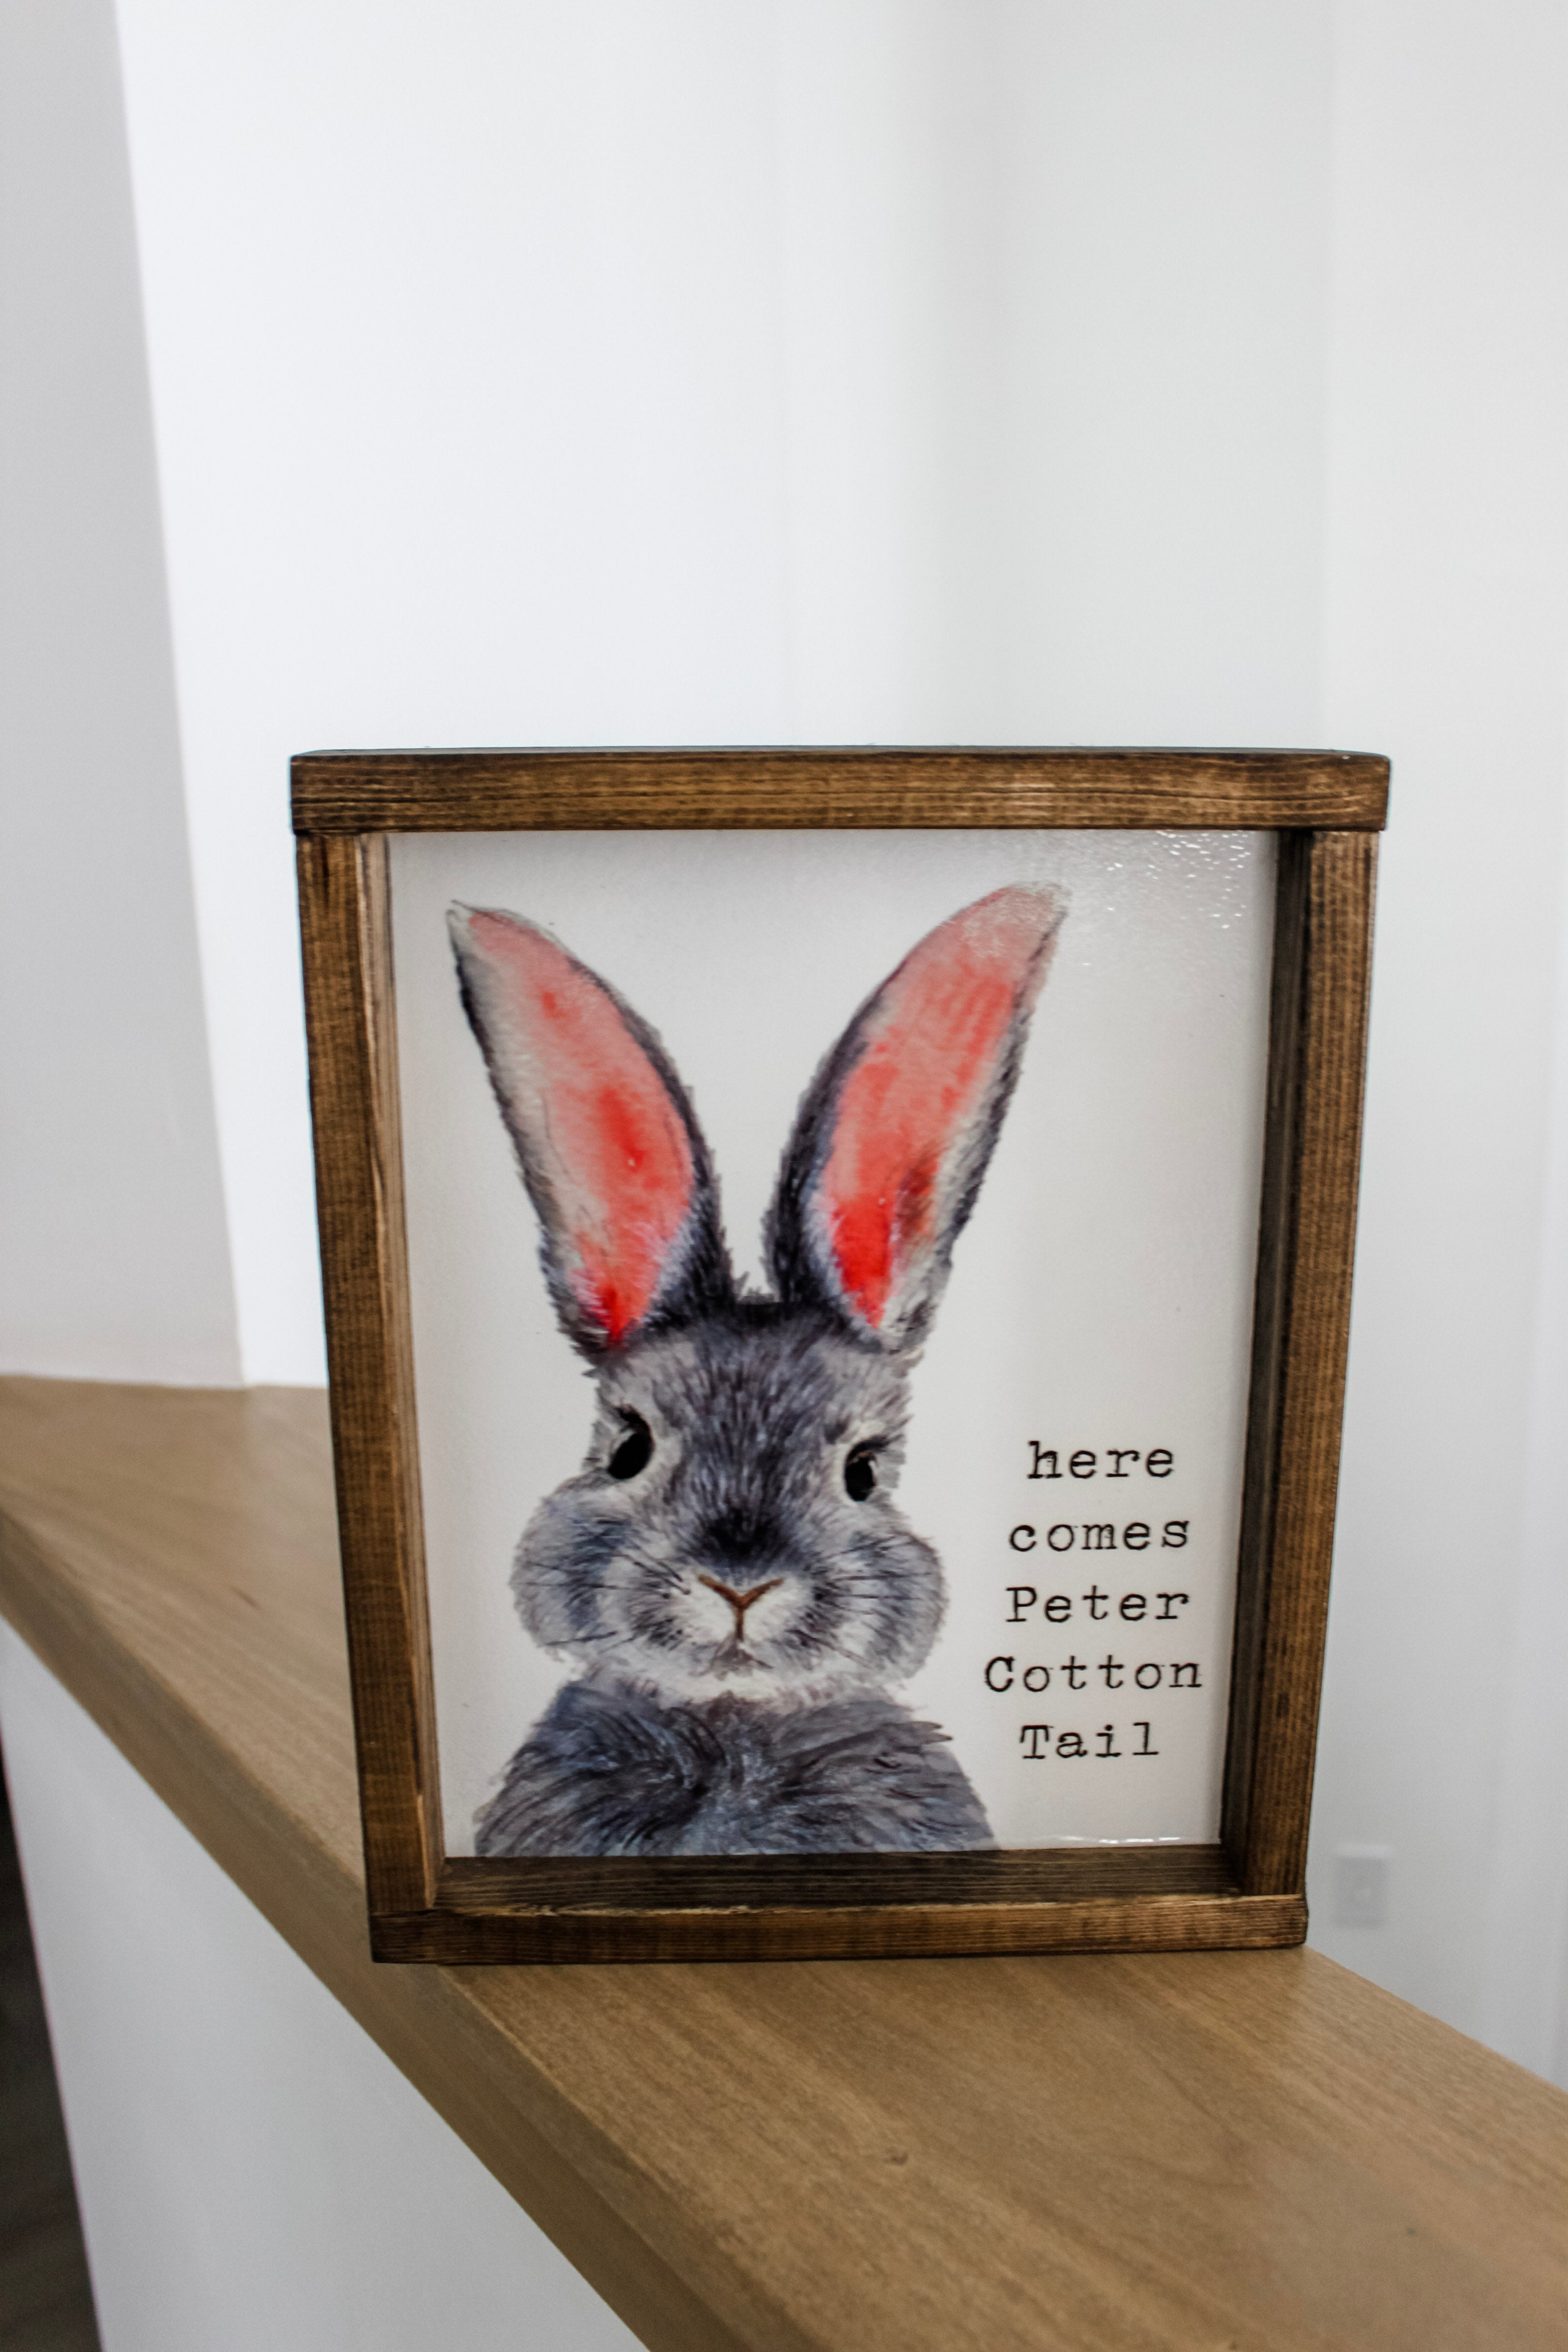 Peter Cotton Tail